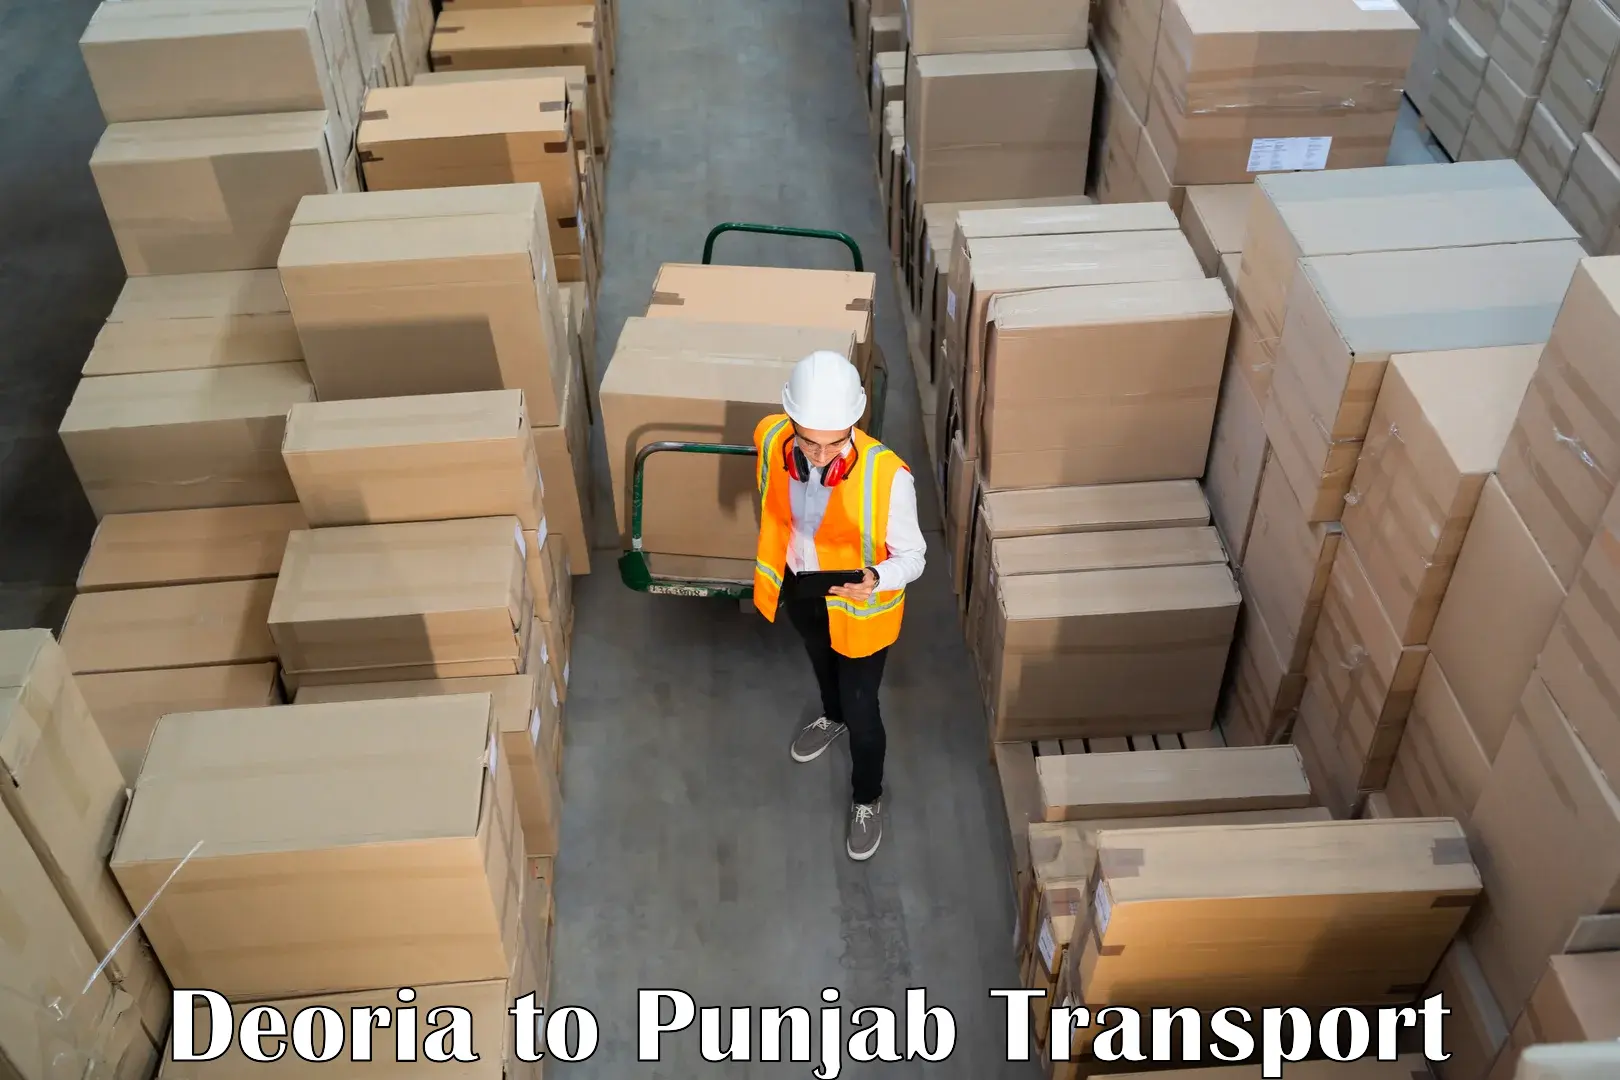 Nationwide transport services Deoria to Goindwal Sahib